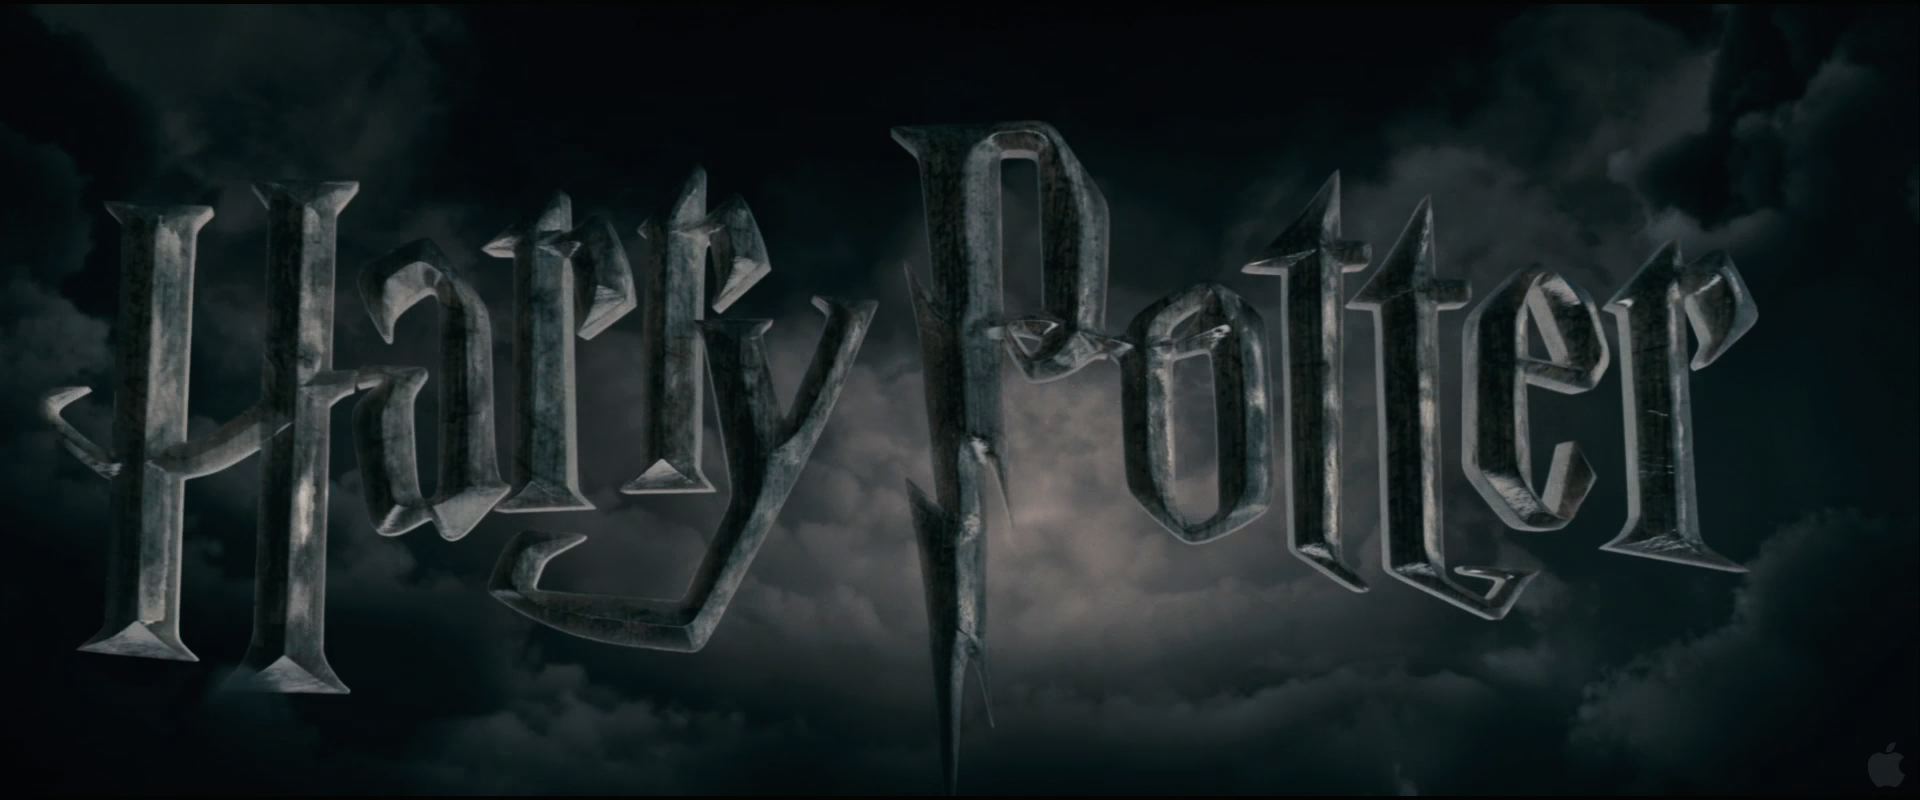 Harry Potter Movie Logo wallpaper   Click picture for high resolution 1920x800